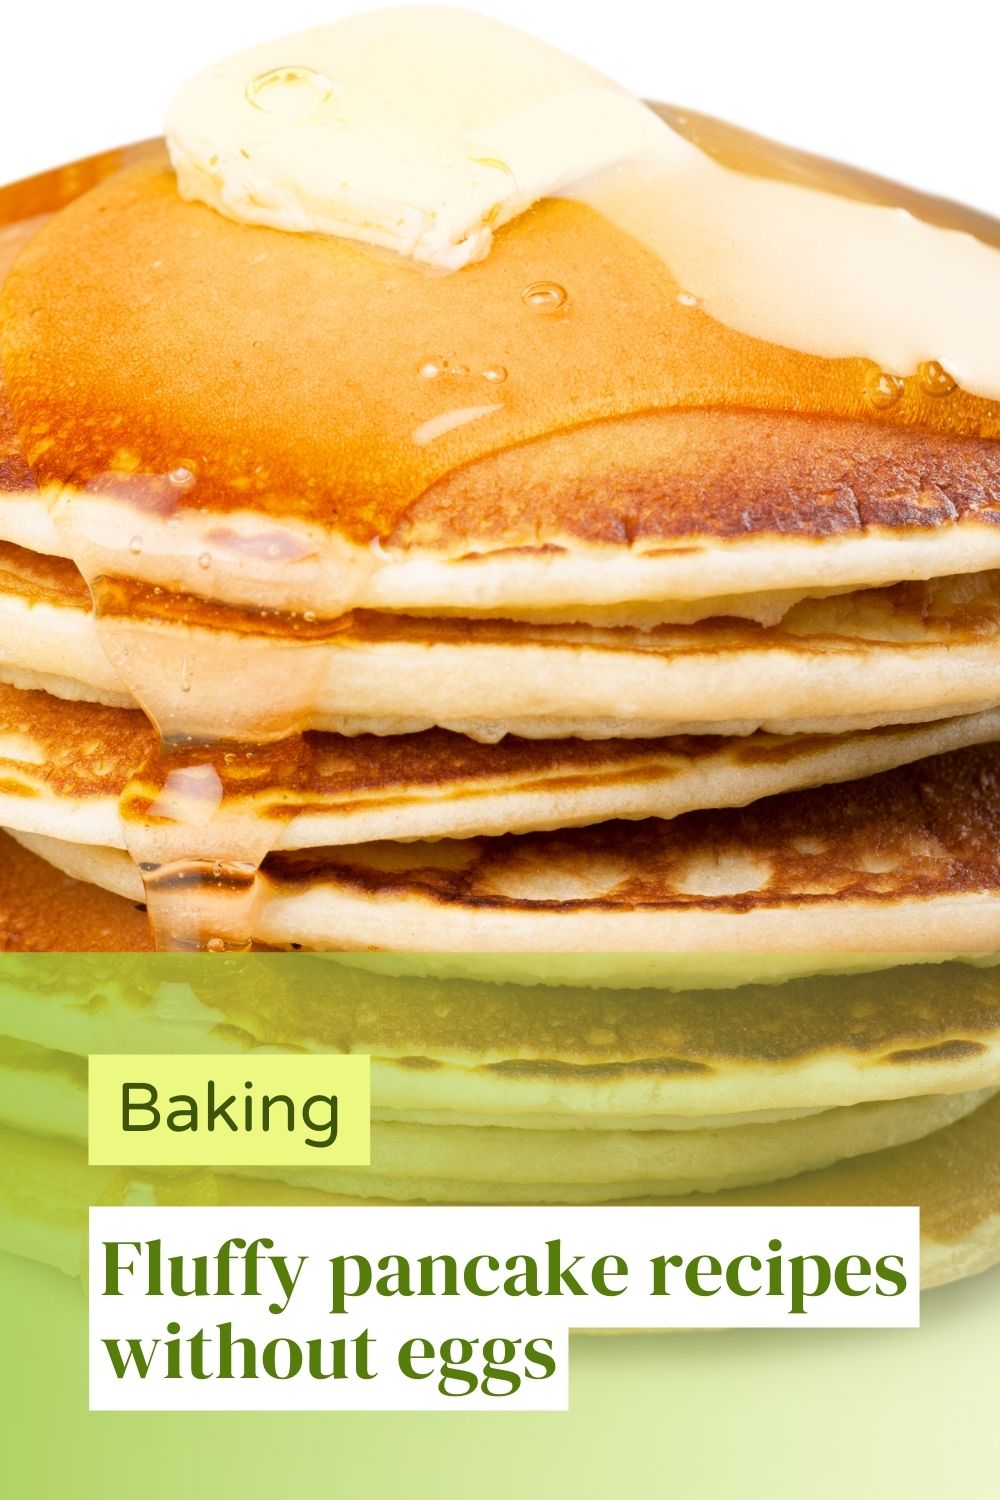 Fluffy pancake recipes without eggs